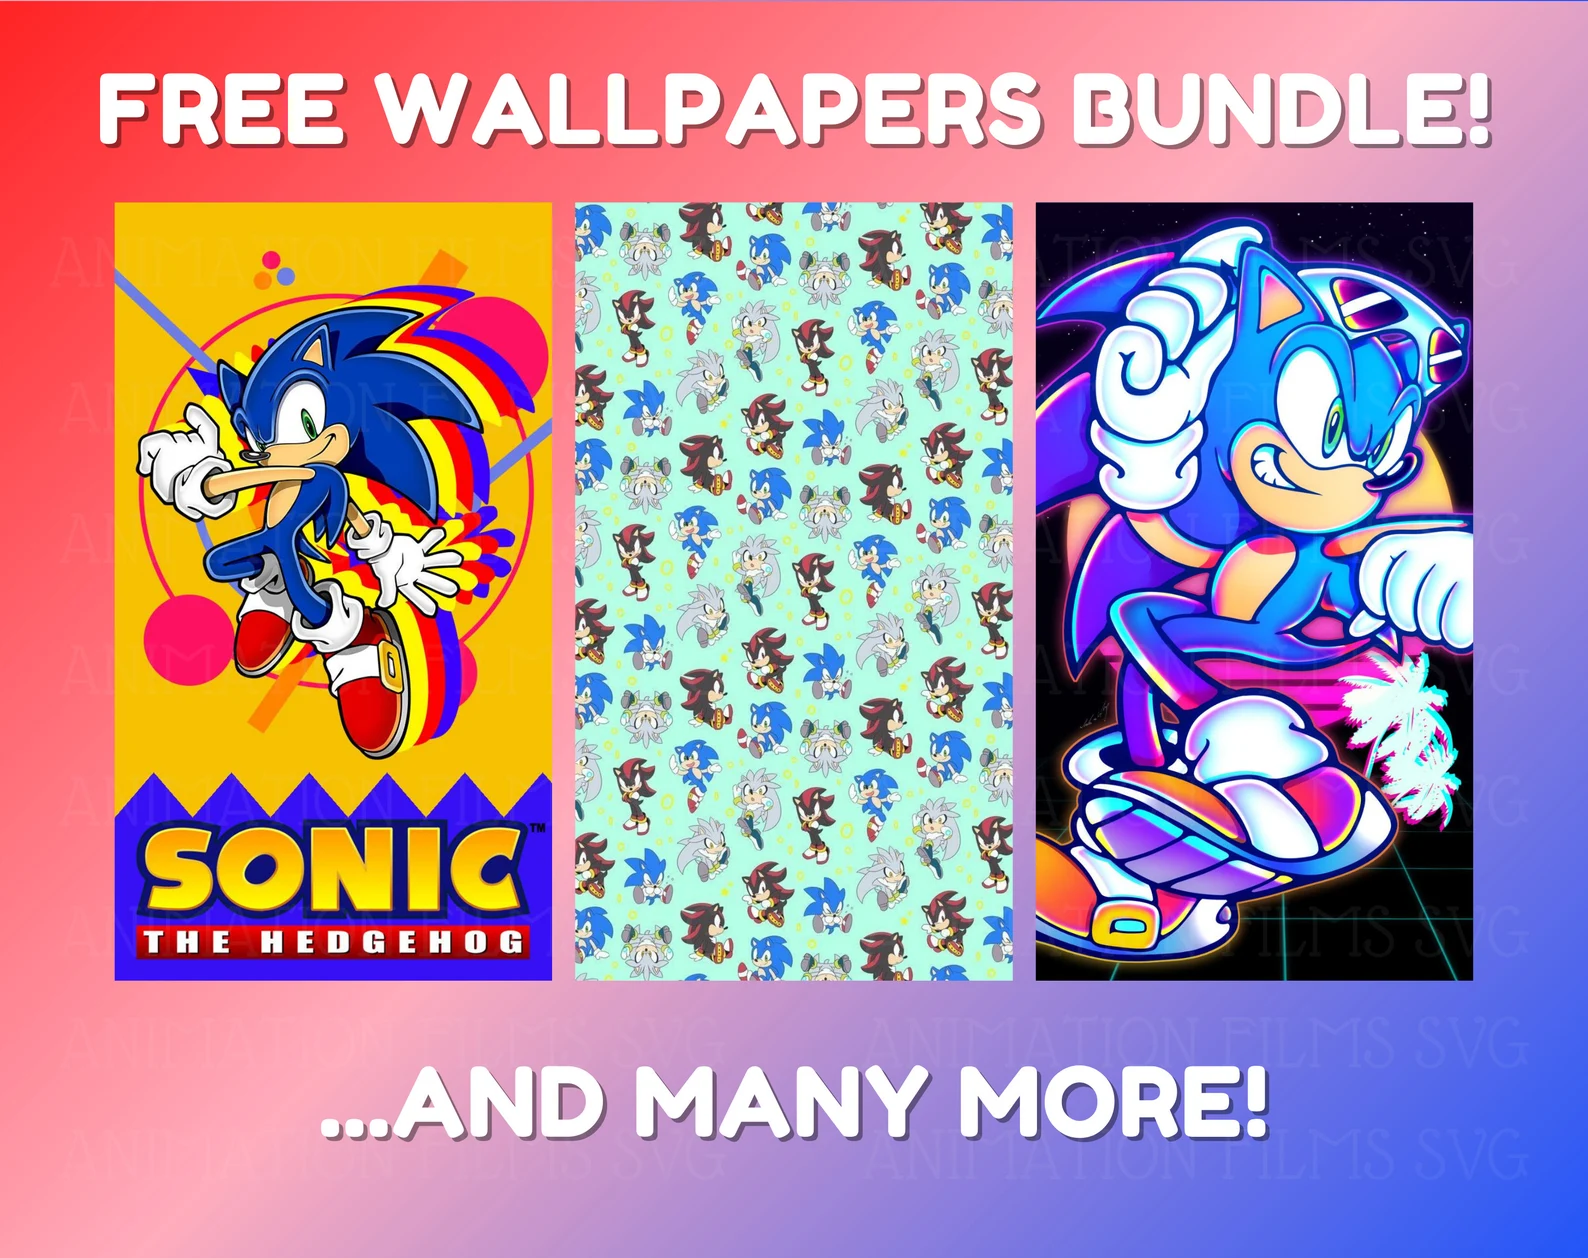 Free wallpapers with sonic illustration.